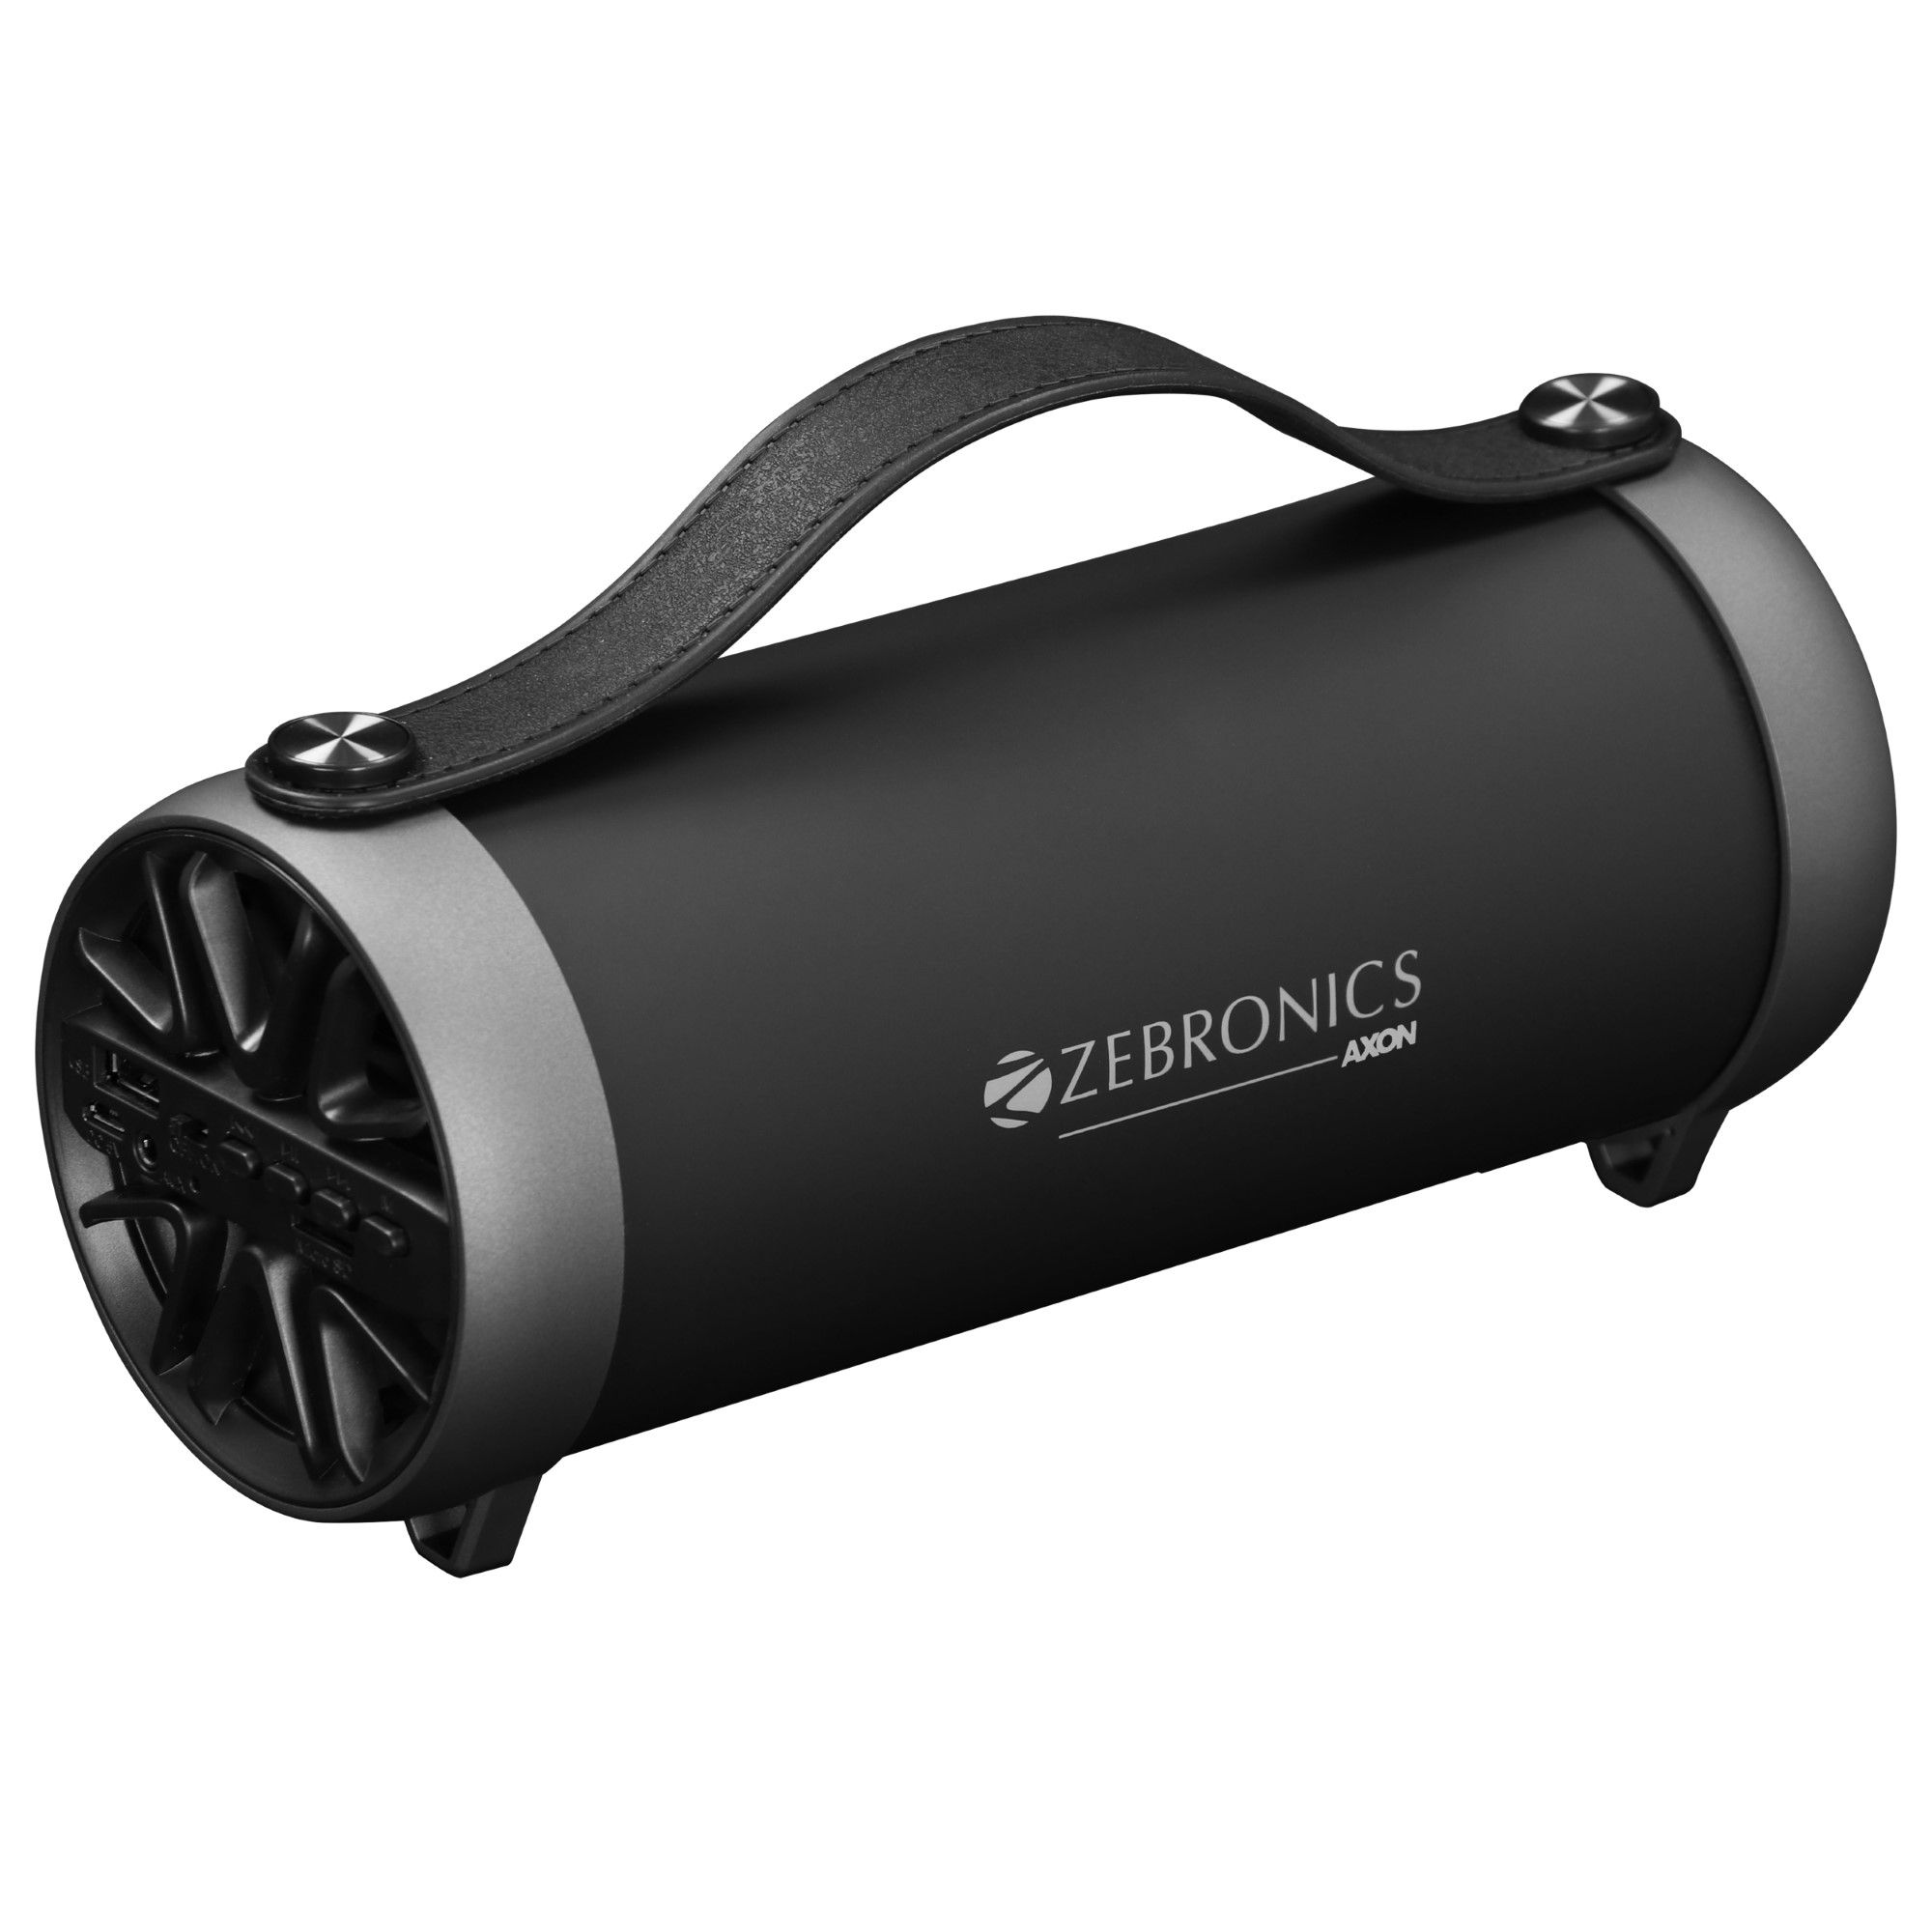 Zebronics Portable Bluetooth Speaker with AUX Function, USB Support, Micro SD Card and FM - AXON